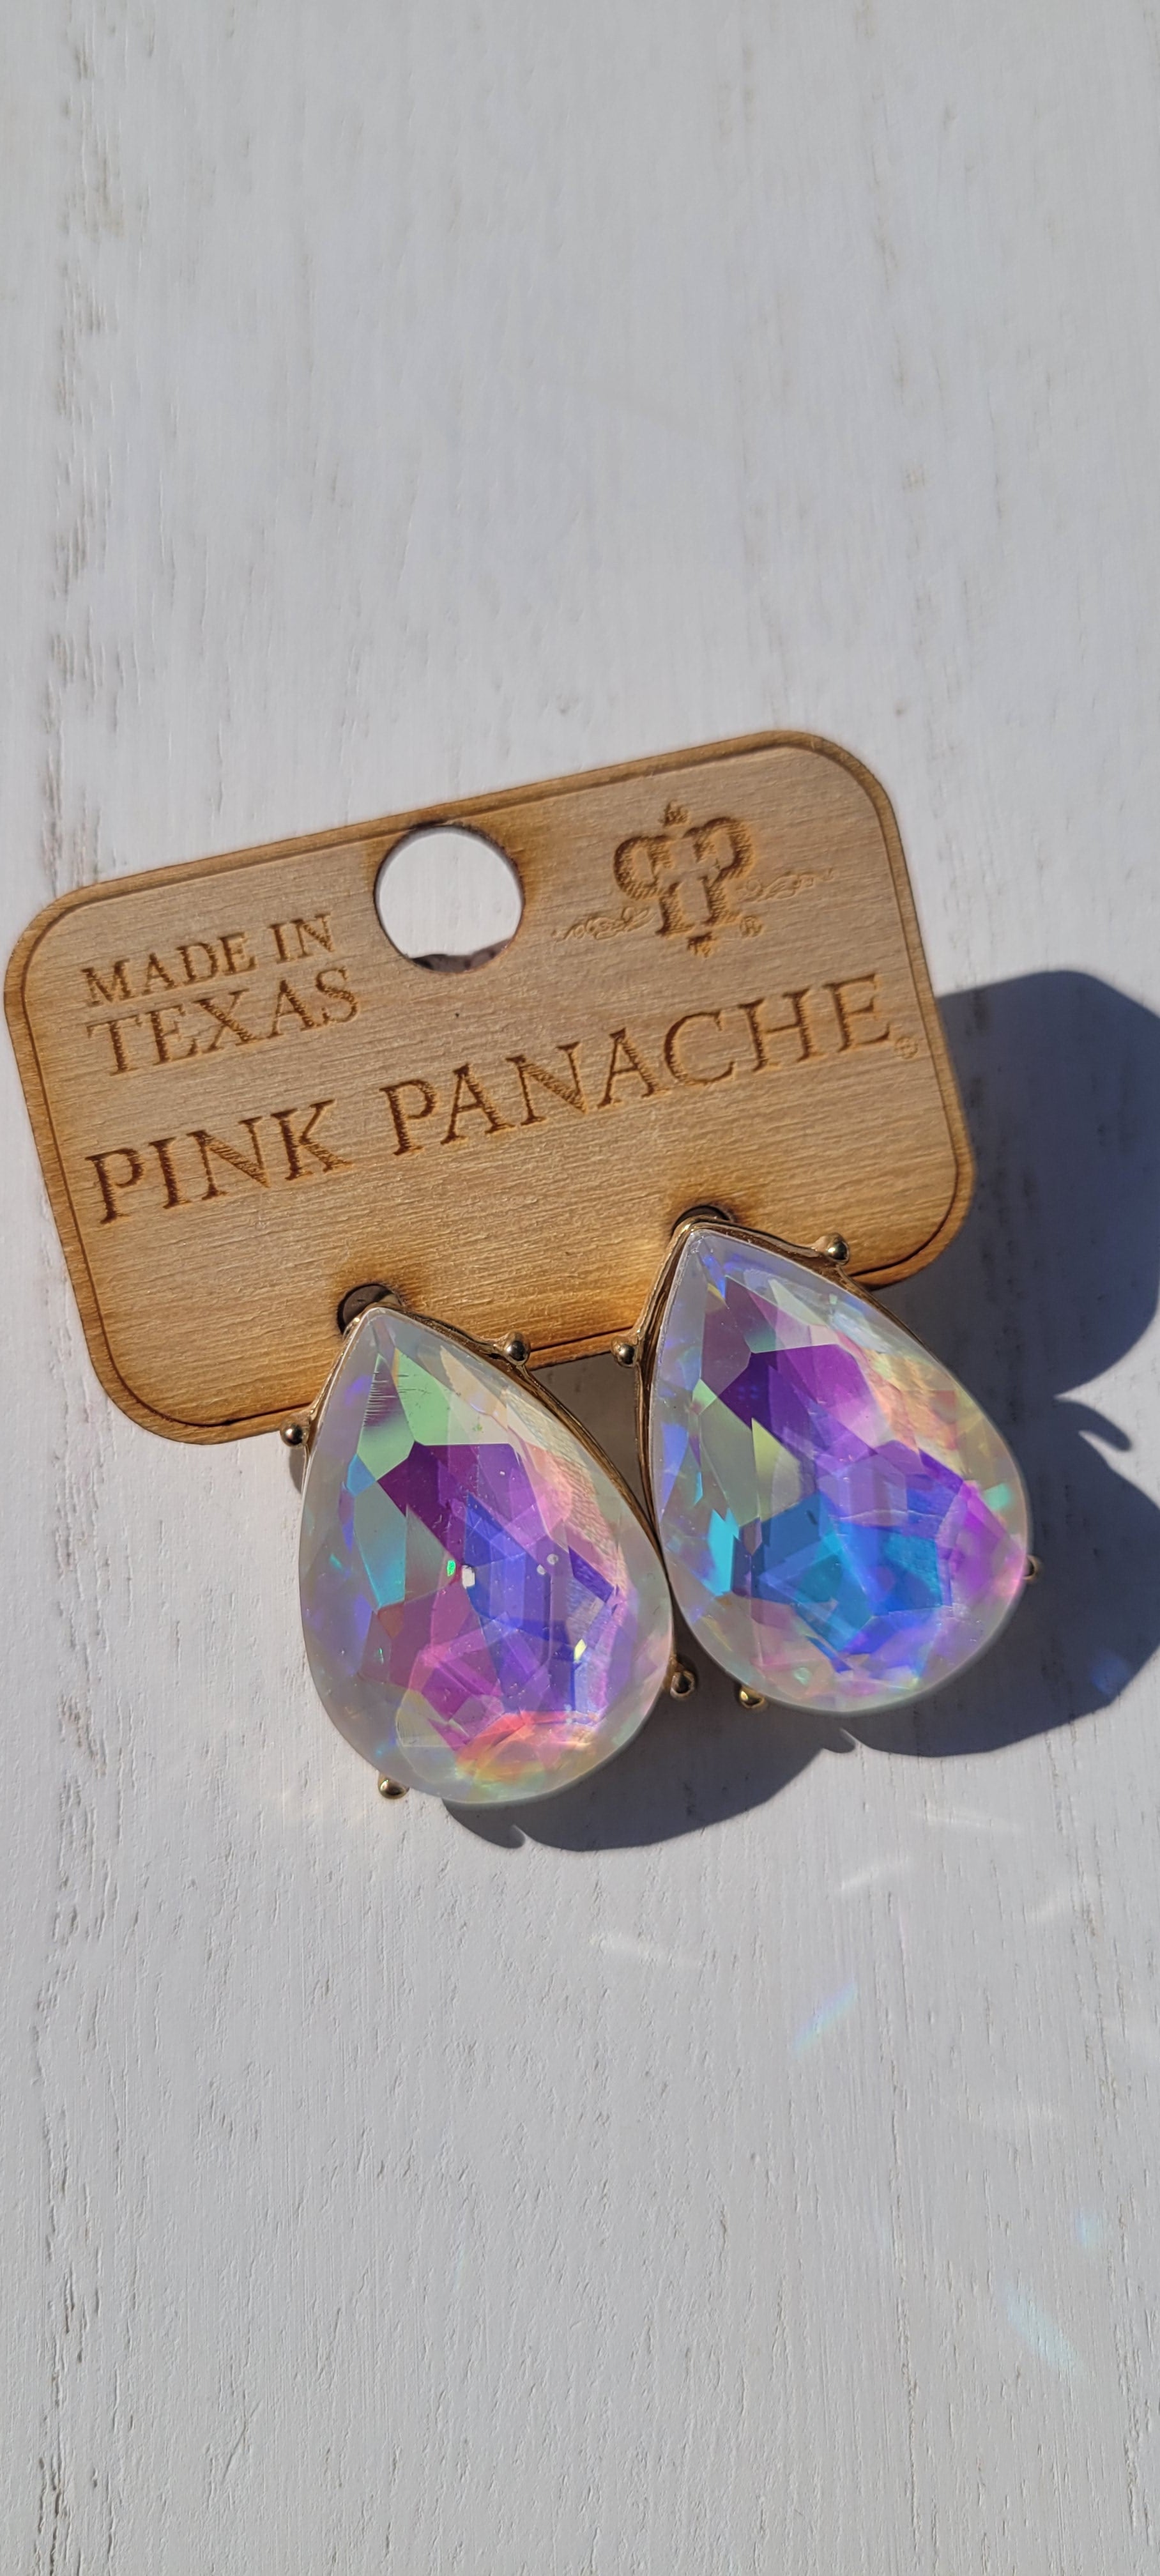 Pink Panache Earrings Color: Large gold/white opal teardrop post earring Limited supply! 